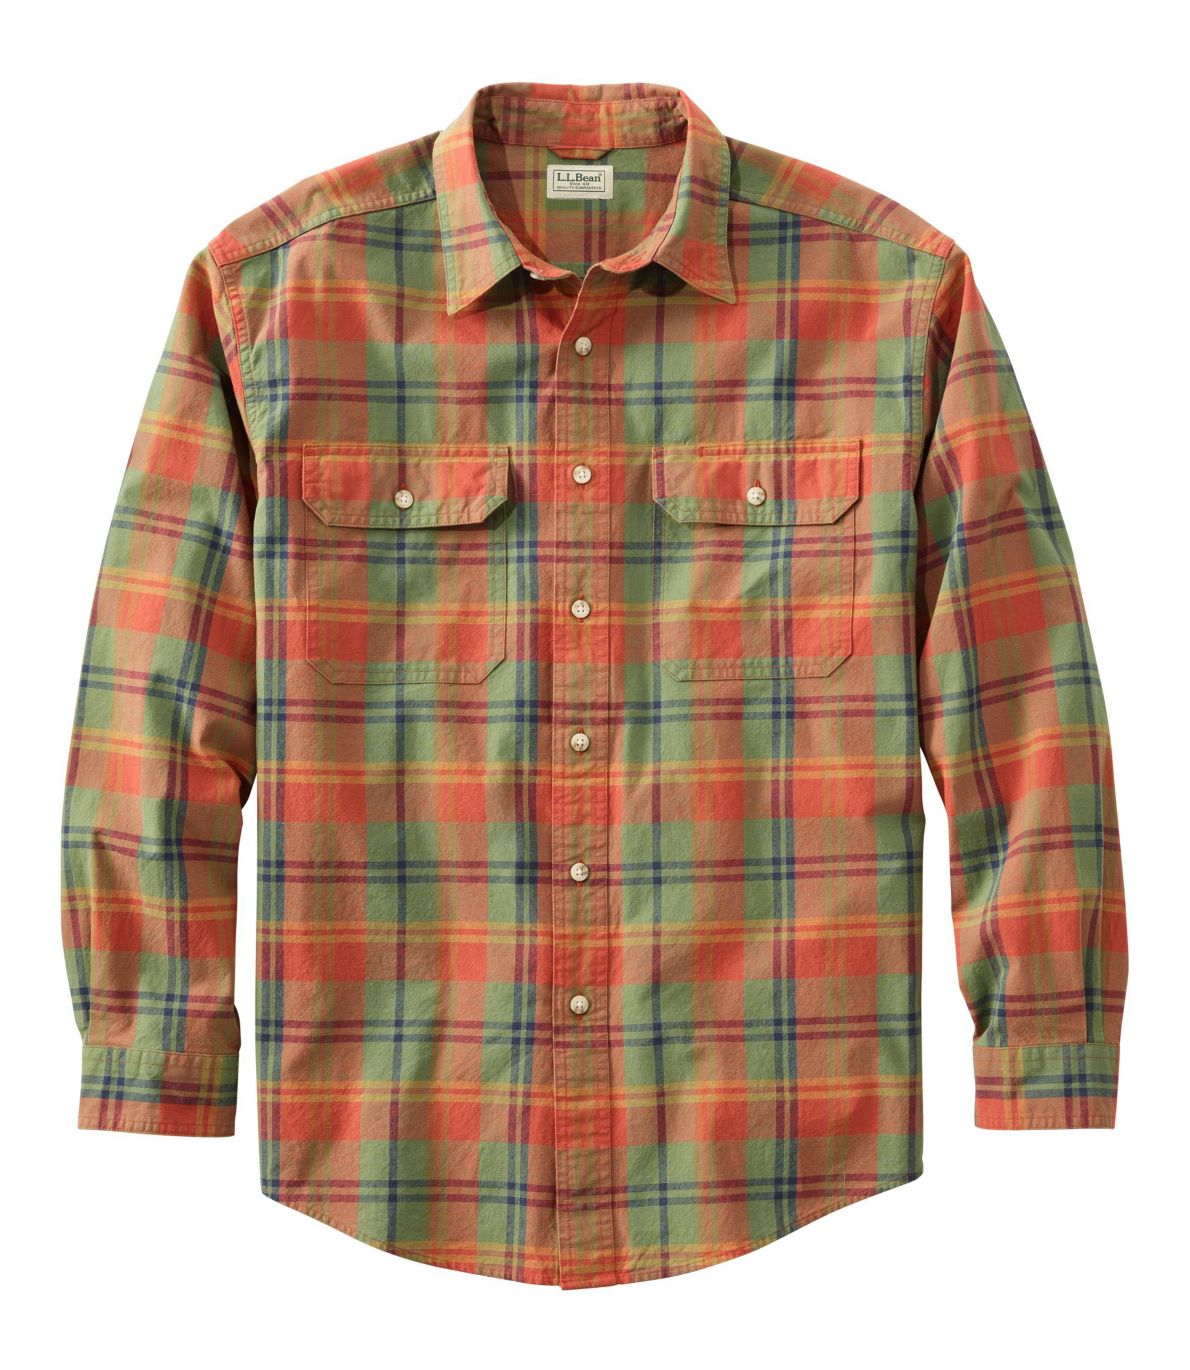 Men's Sunwashed Canvas Shirt, Traditional Fit Plaid